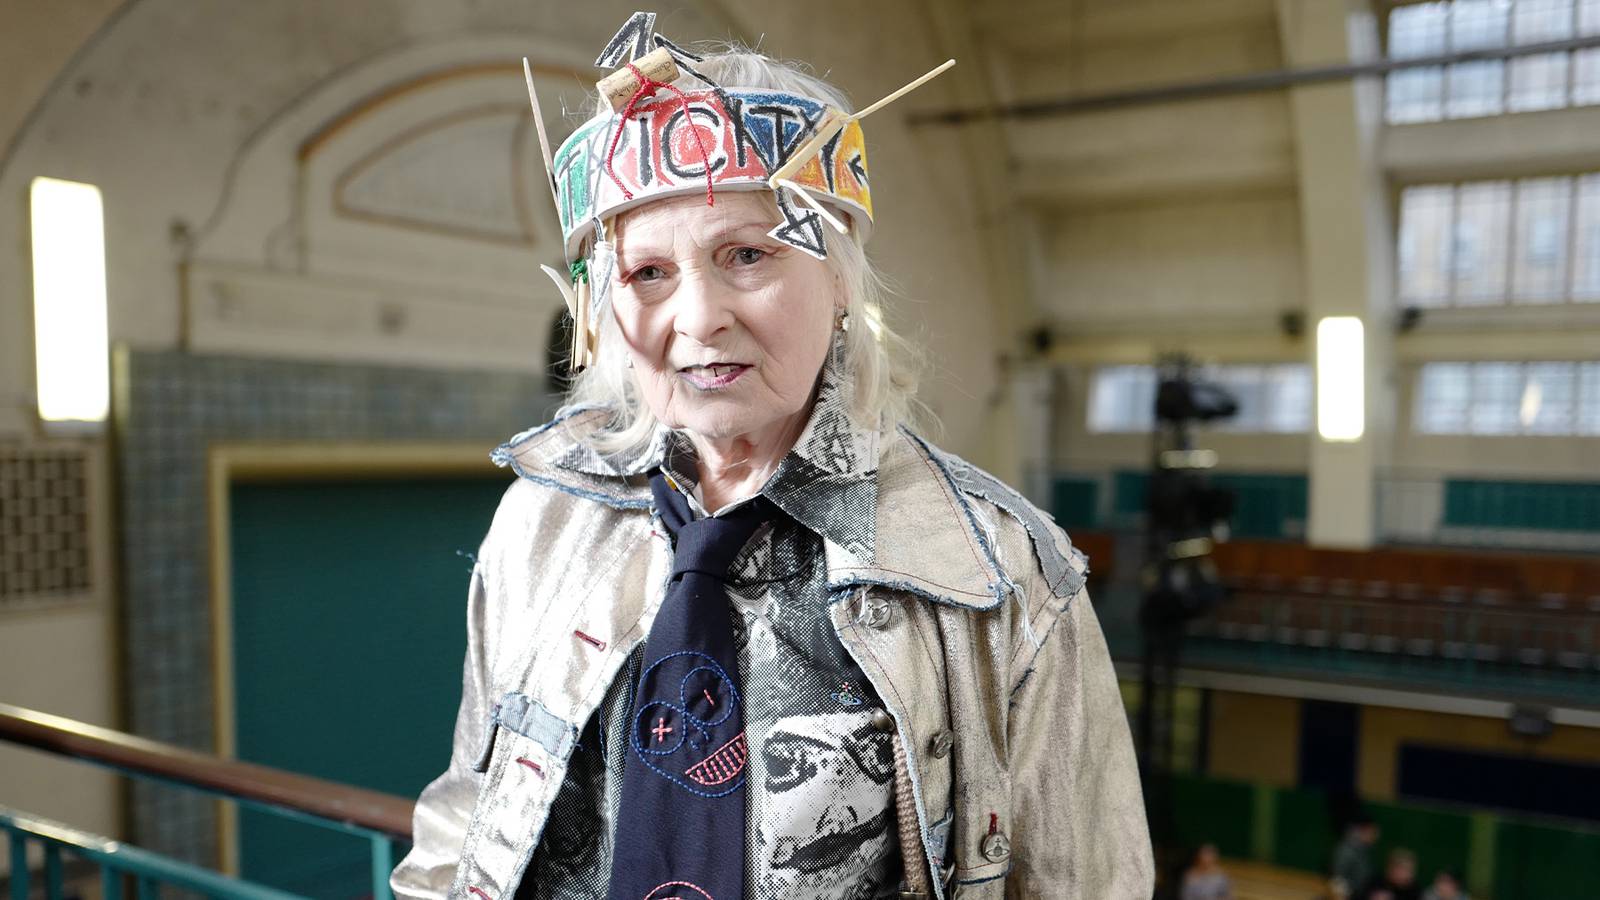 Vivienne Westwood style: 10 buys that will revolutionise your wardrobe